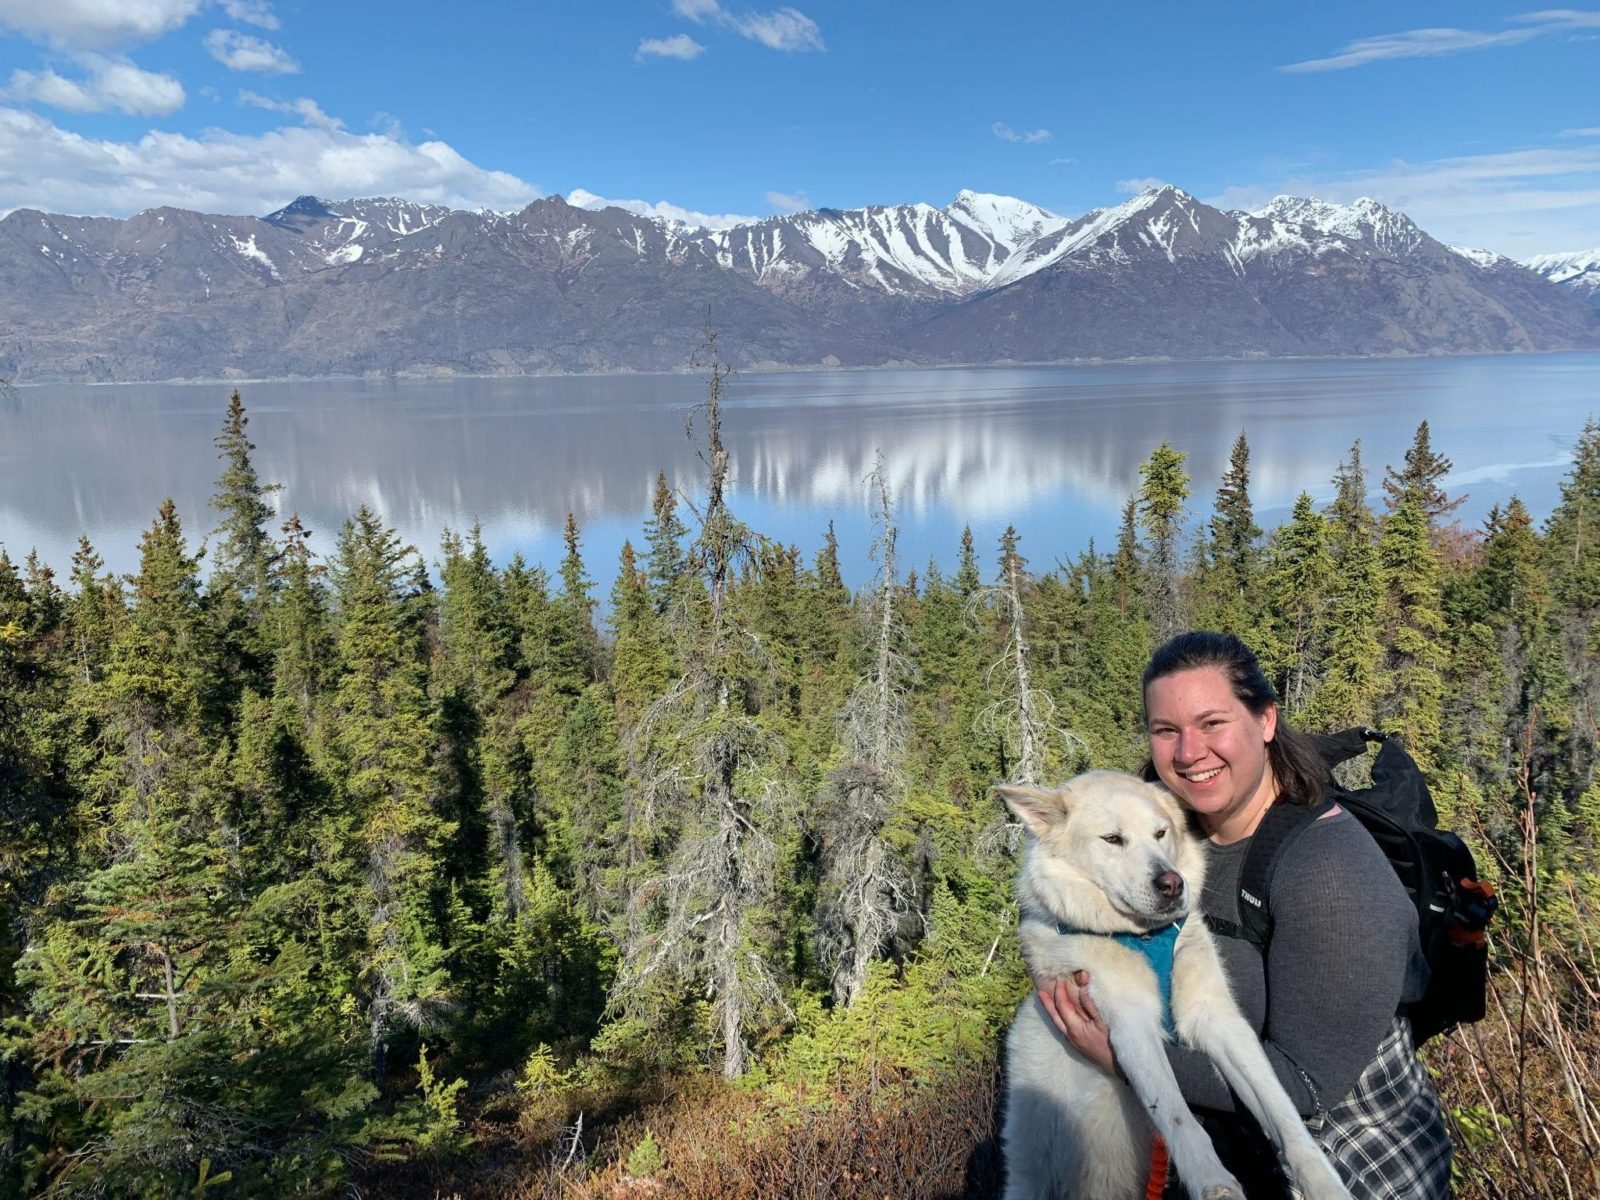 Mackenzie holds a white dog while hiking above a view of the Cook Inlet, reflecting blue sky and mountains 